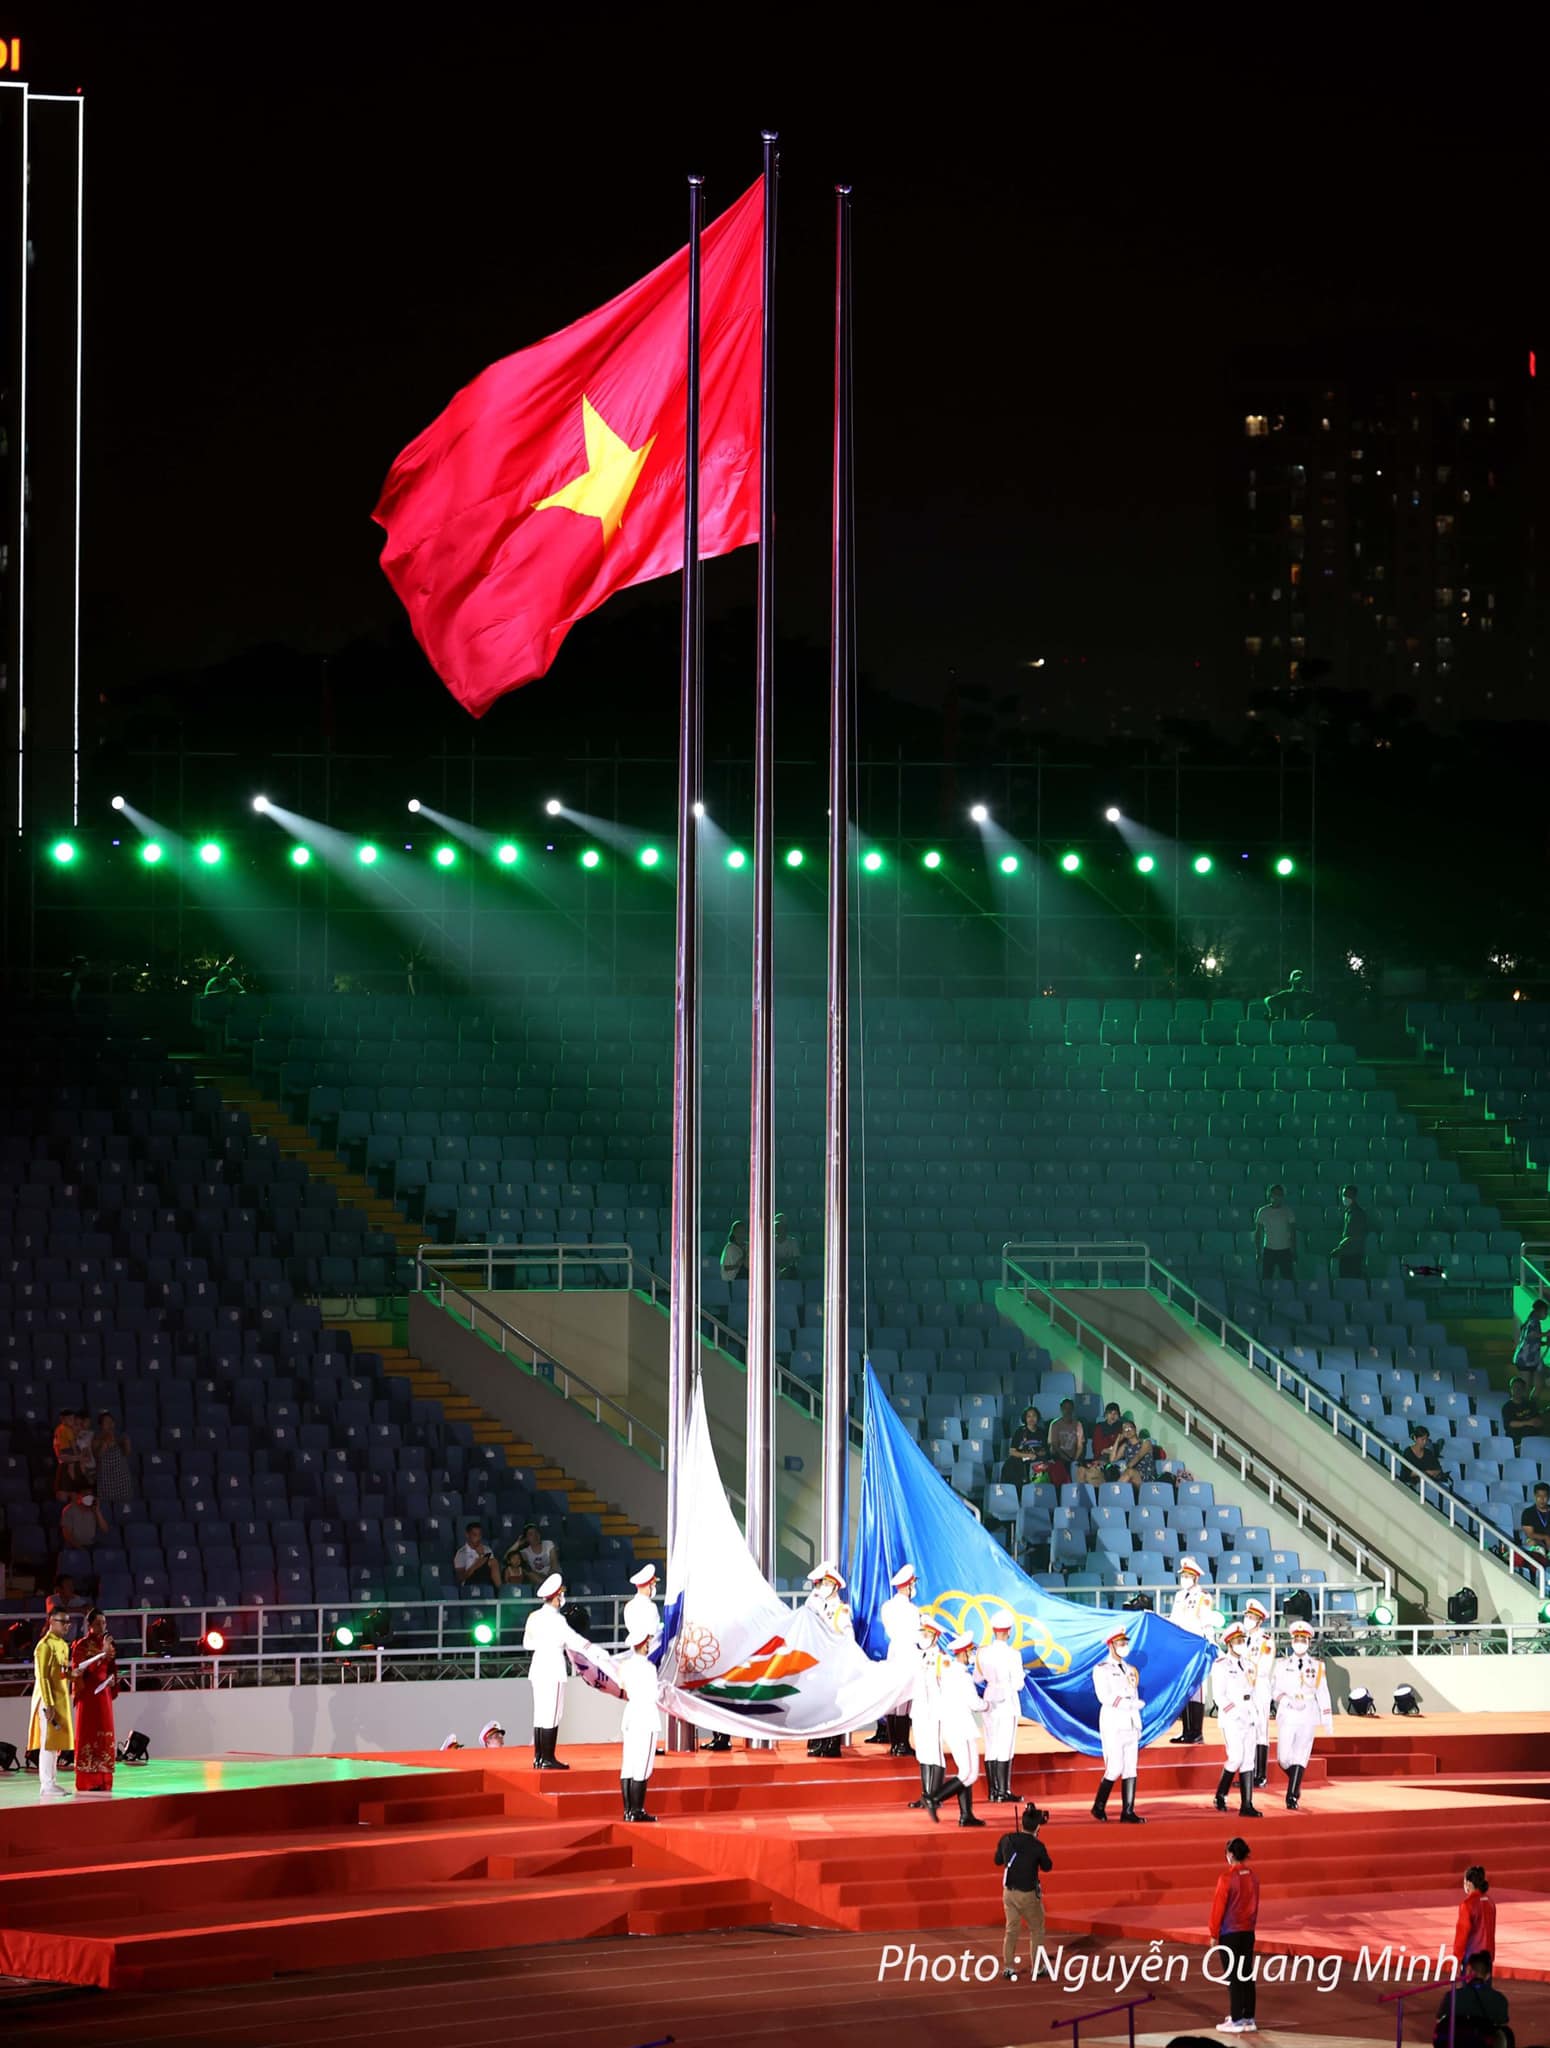 President Nguyen Xuan Phuc will announce the opening of the 31st SEA Games - Photo 2.